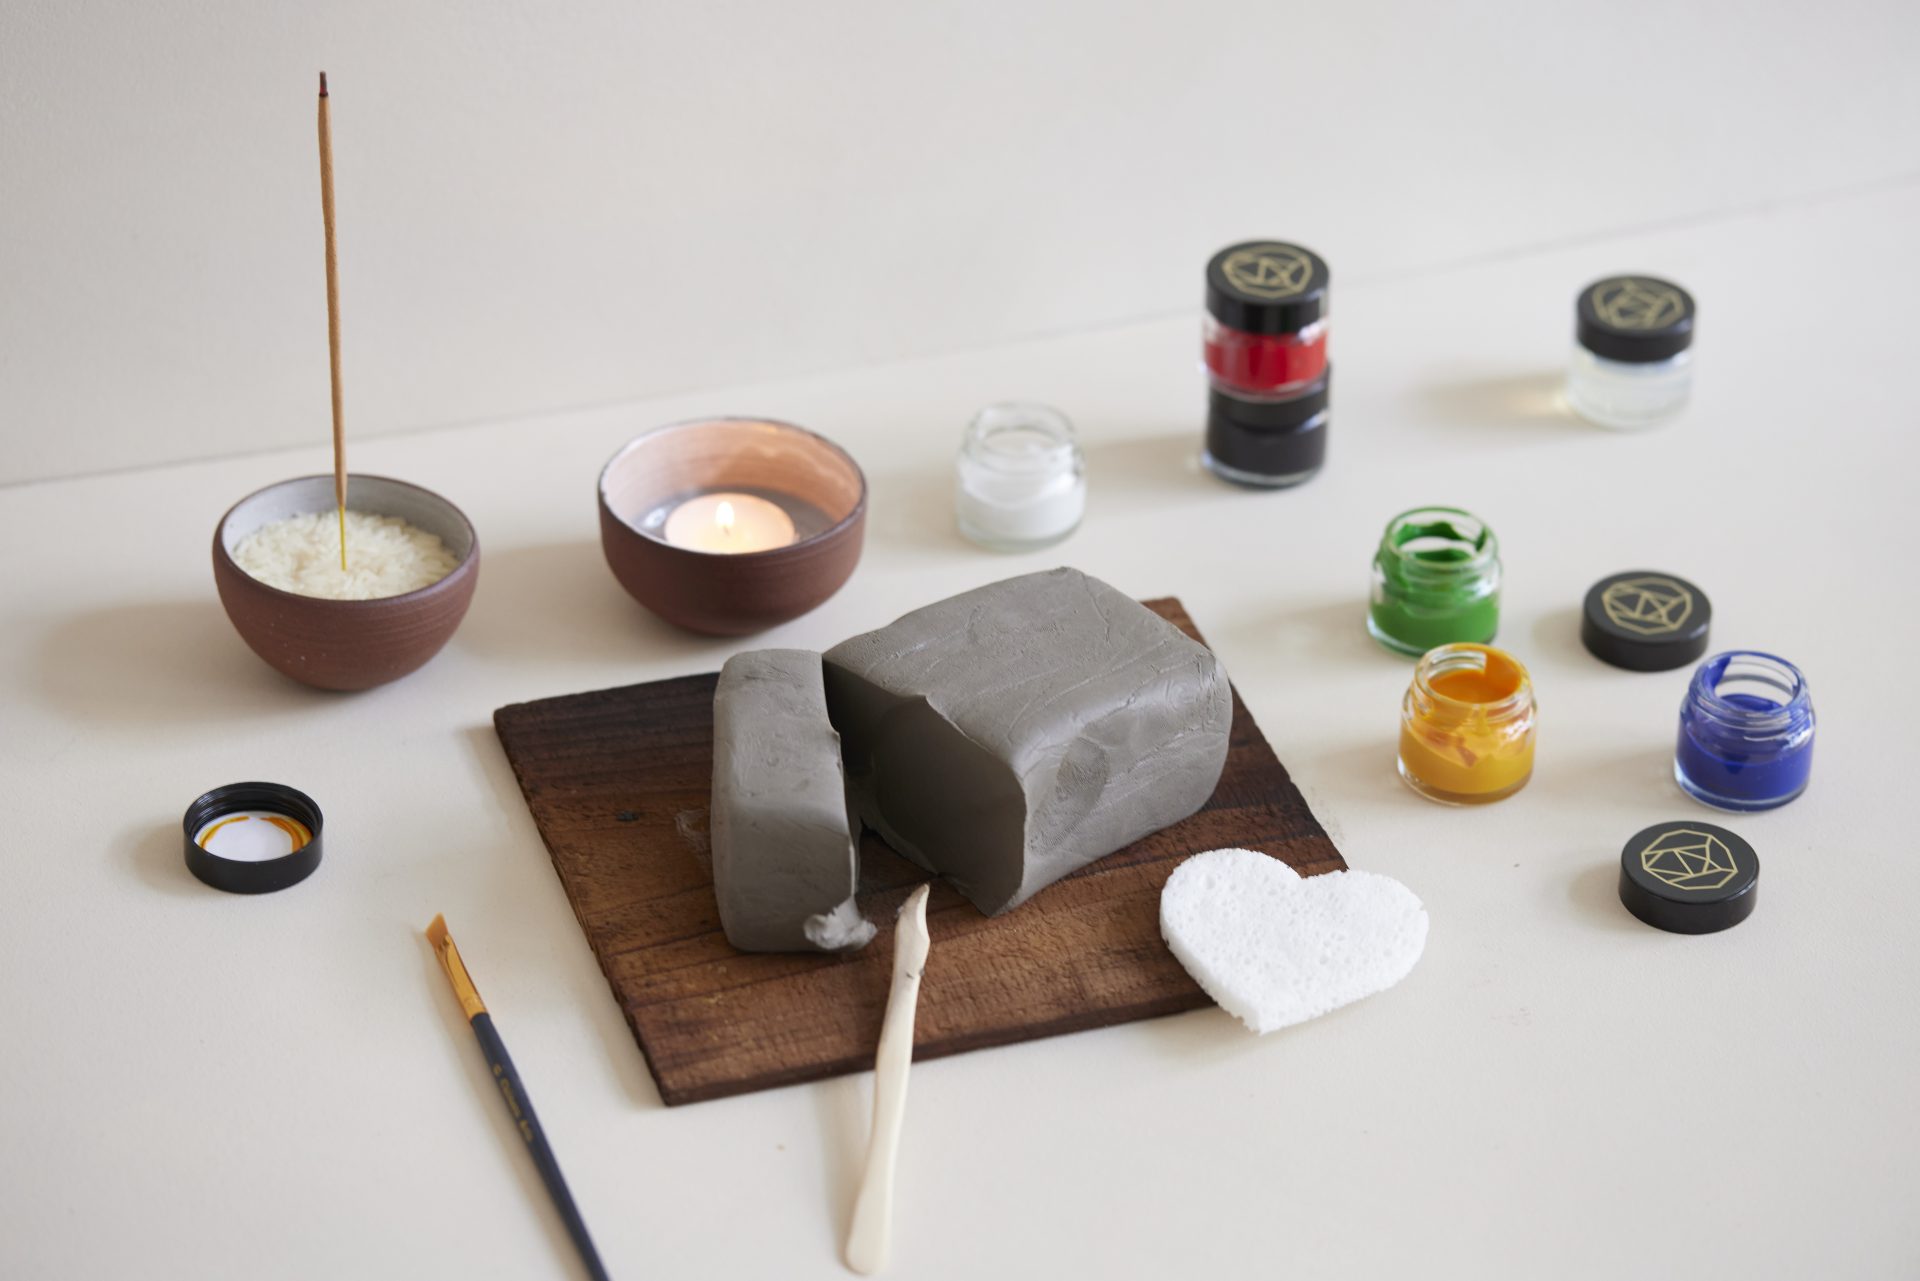 A London pottery studio is sending DIY clay kits to homes